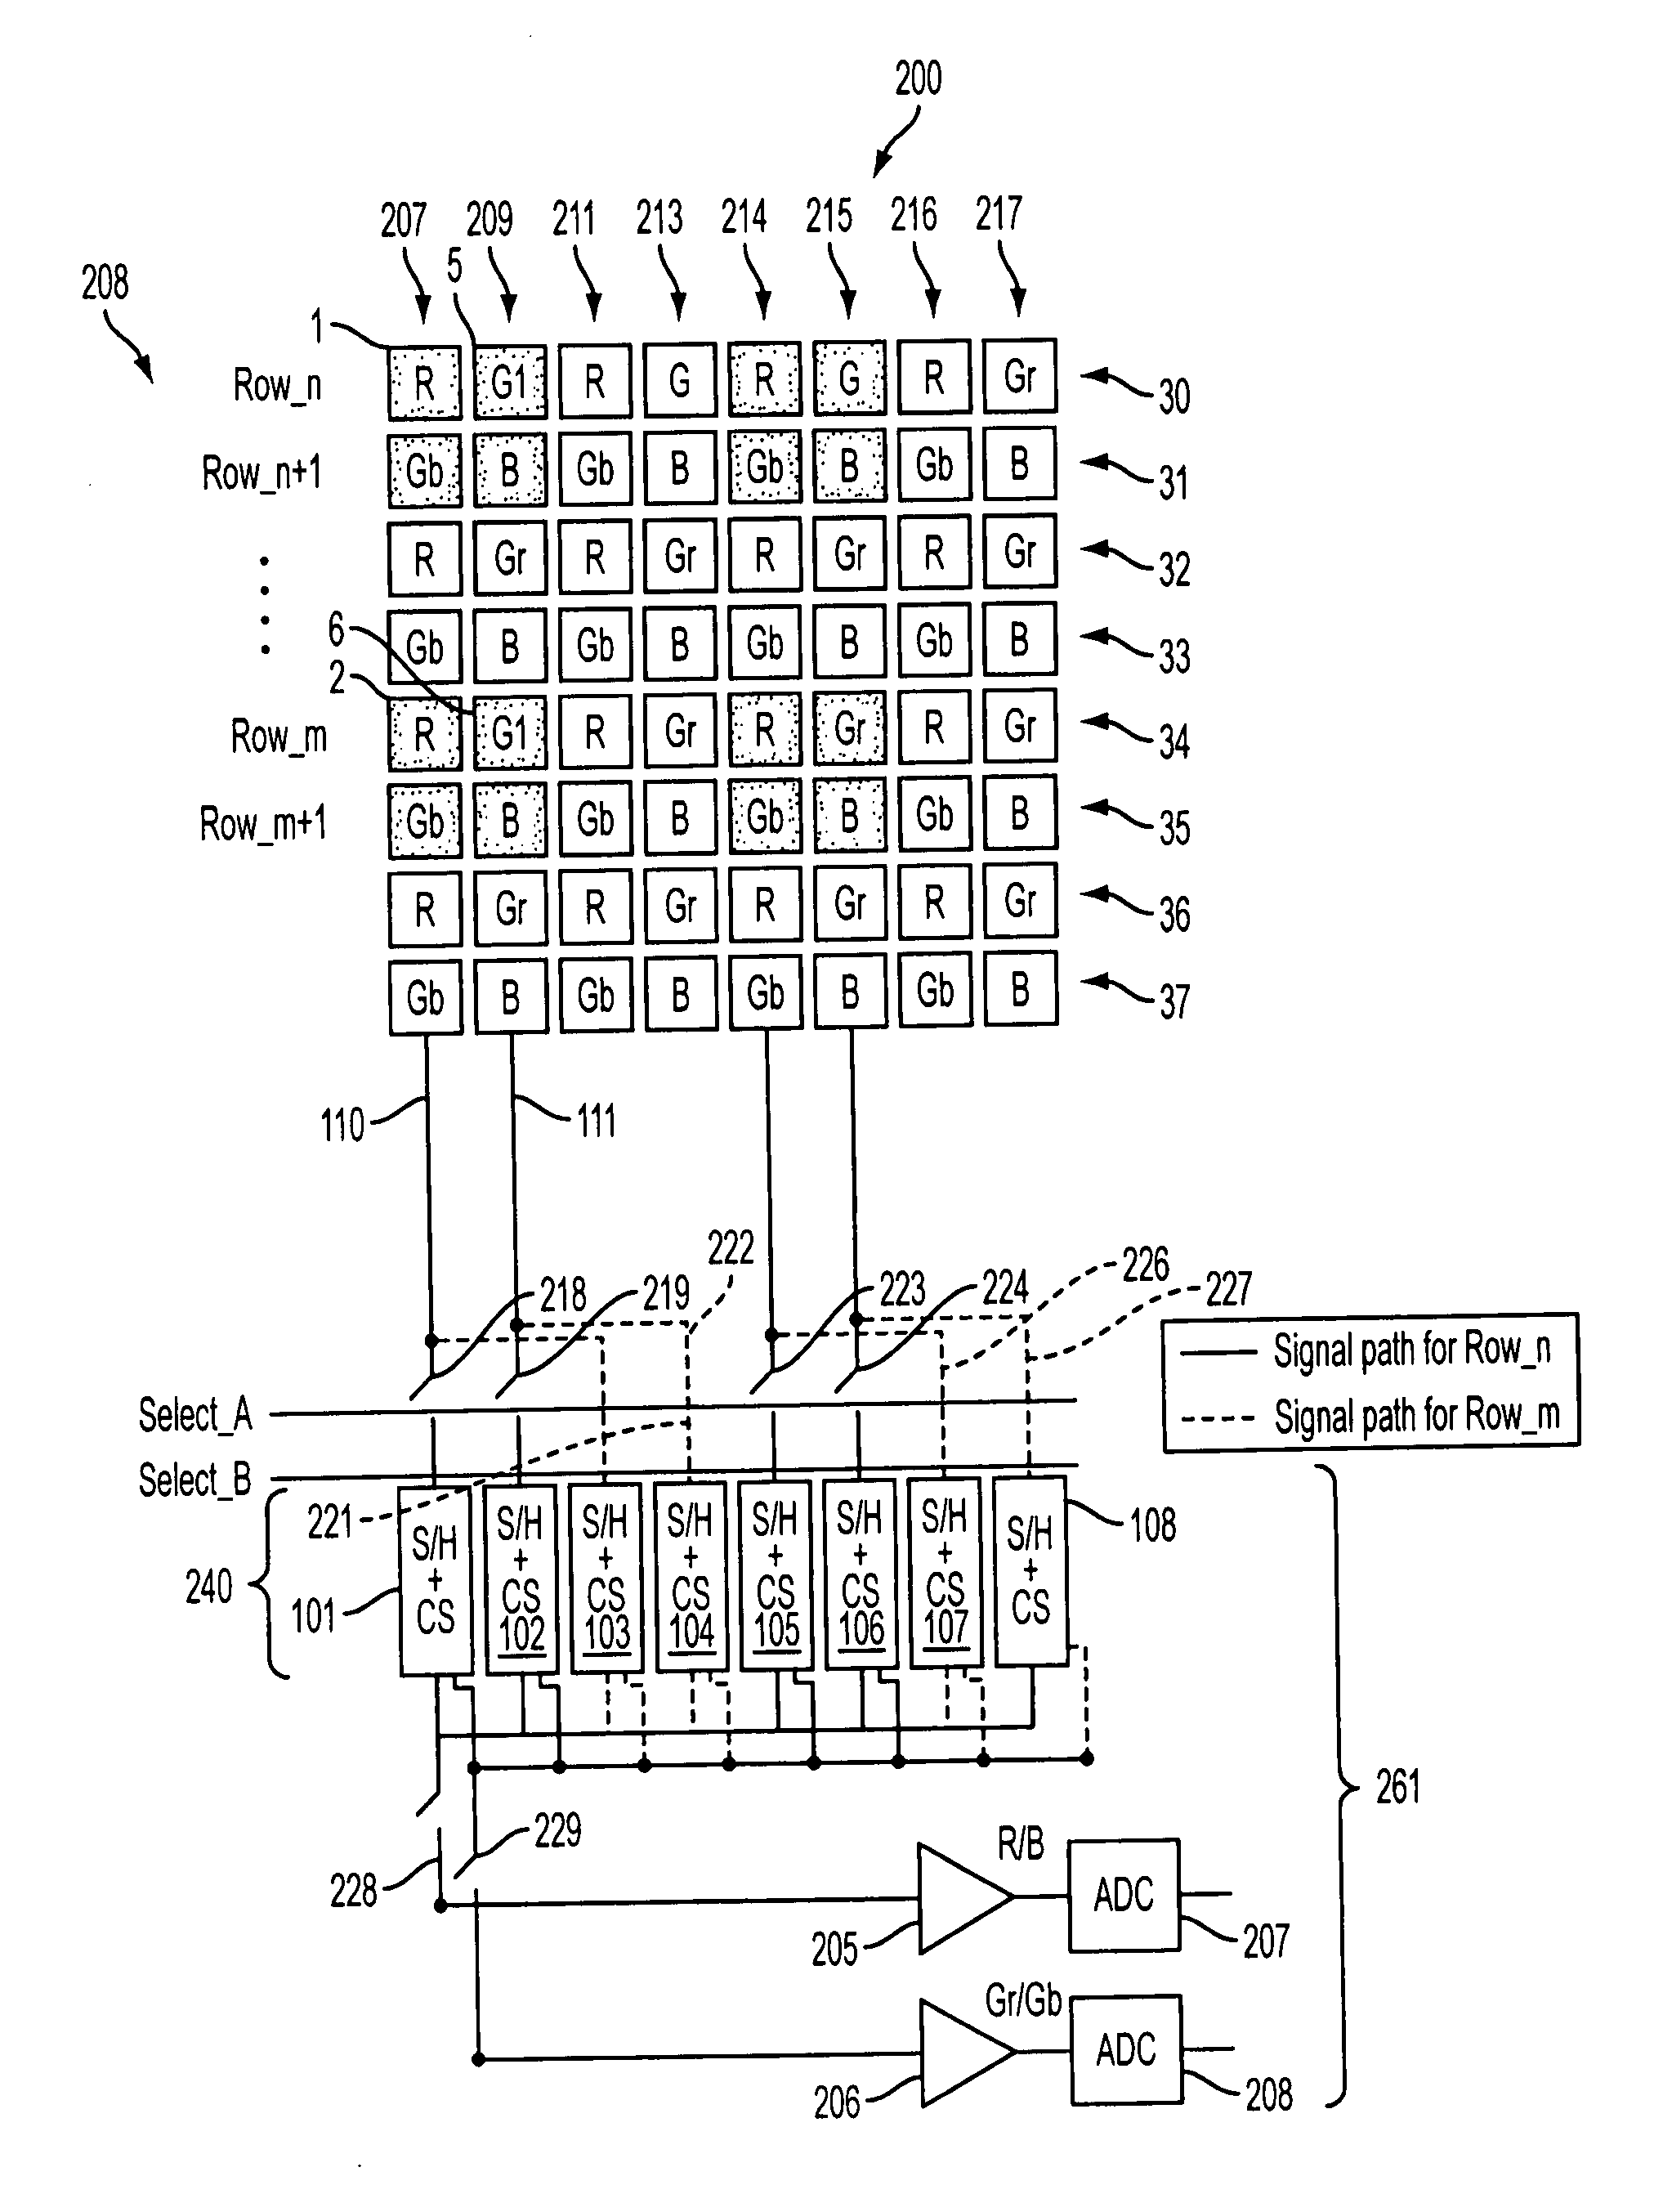 Imager methods, apparatuses, and systems providing a skip mode with a wide dynamic range operation